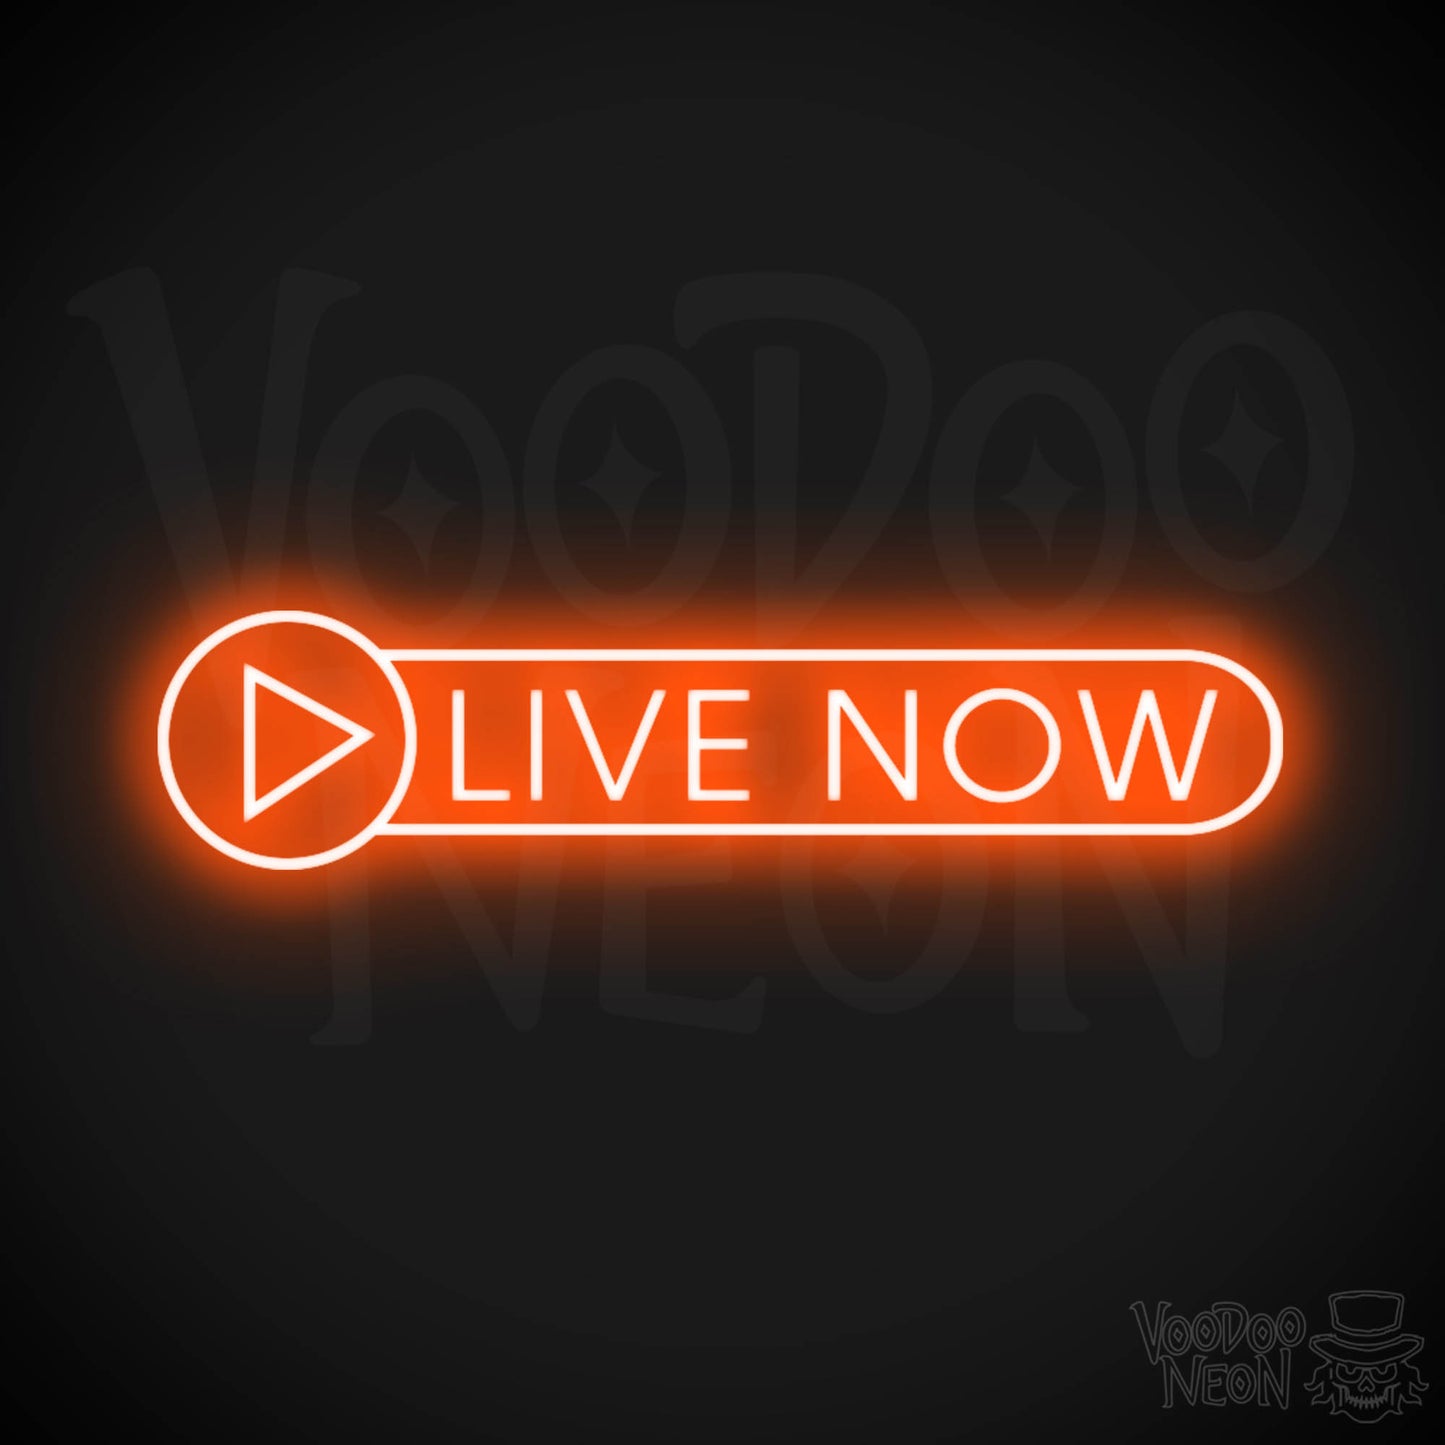 Live Now Neon Sign - Neon Live Now Sign - Podcast Sign - Color Orange